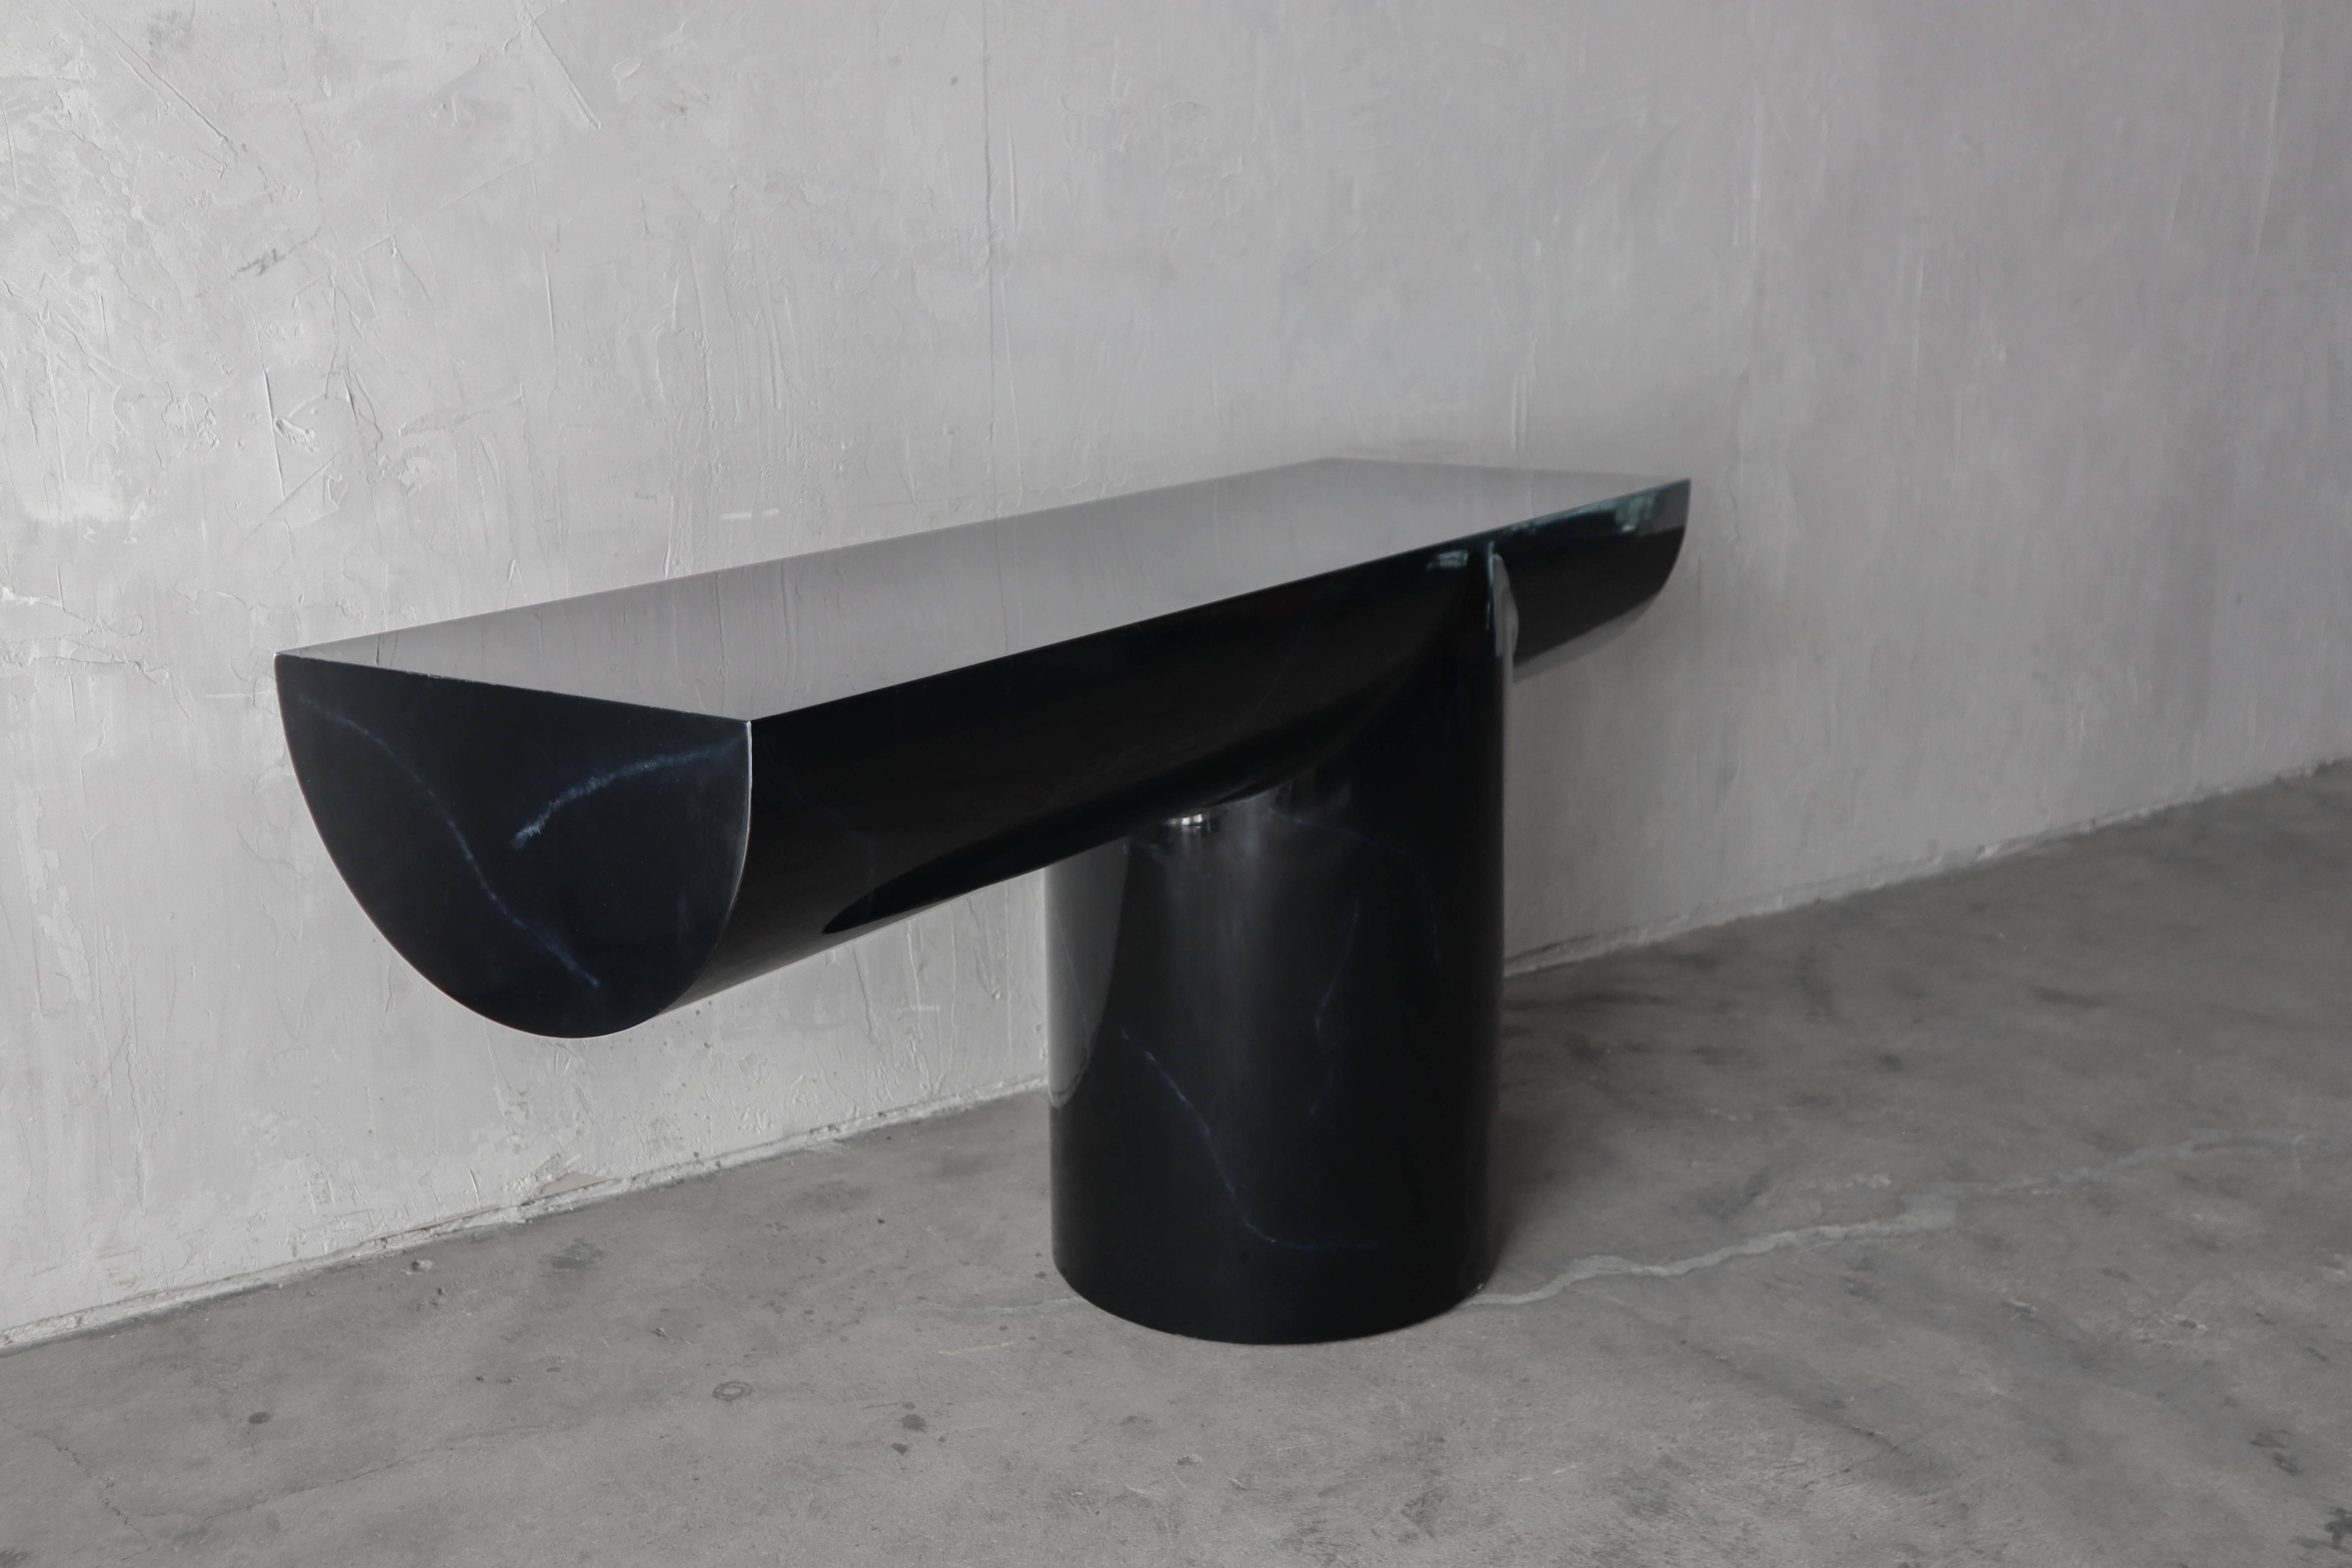 Beautiful, Tee console by J. Wade Beam for Breuton International.   This cantilevered modern console table is piano black with a few gray marble looking veins.  A big statements

The piece is lacquered and is in good condition overall.  It does show